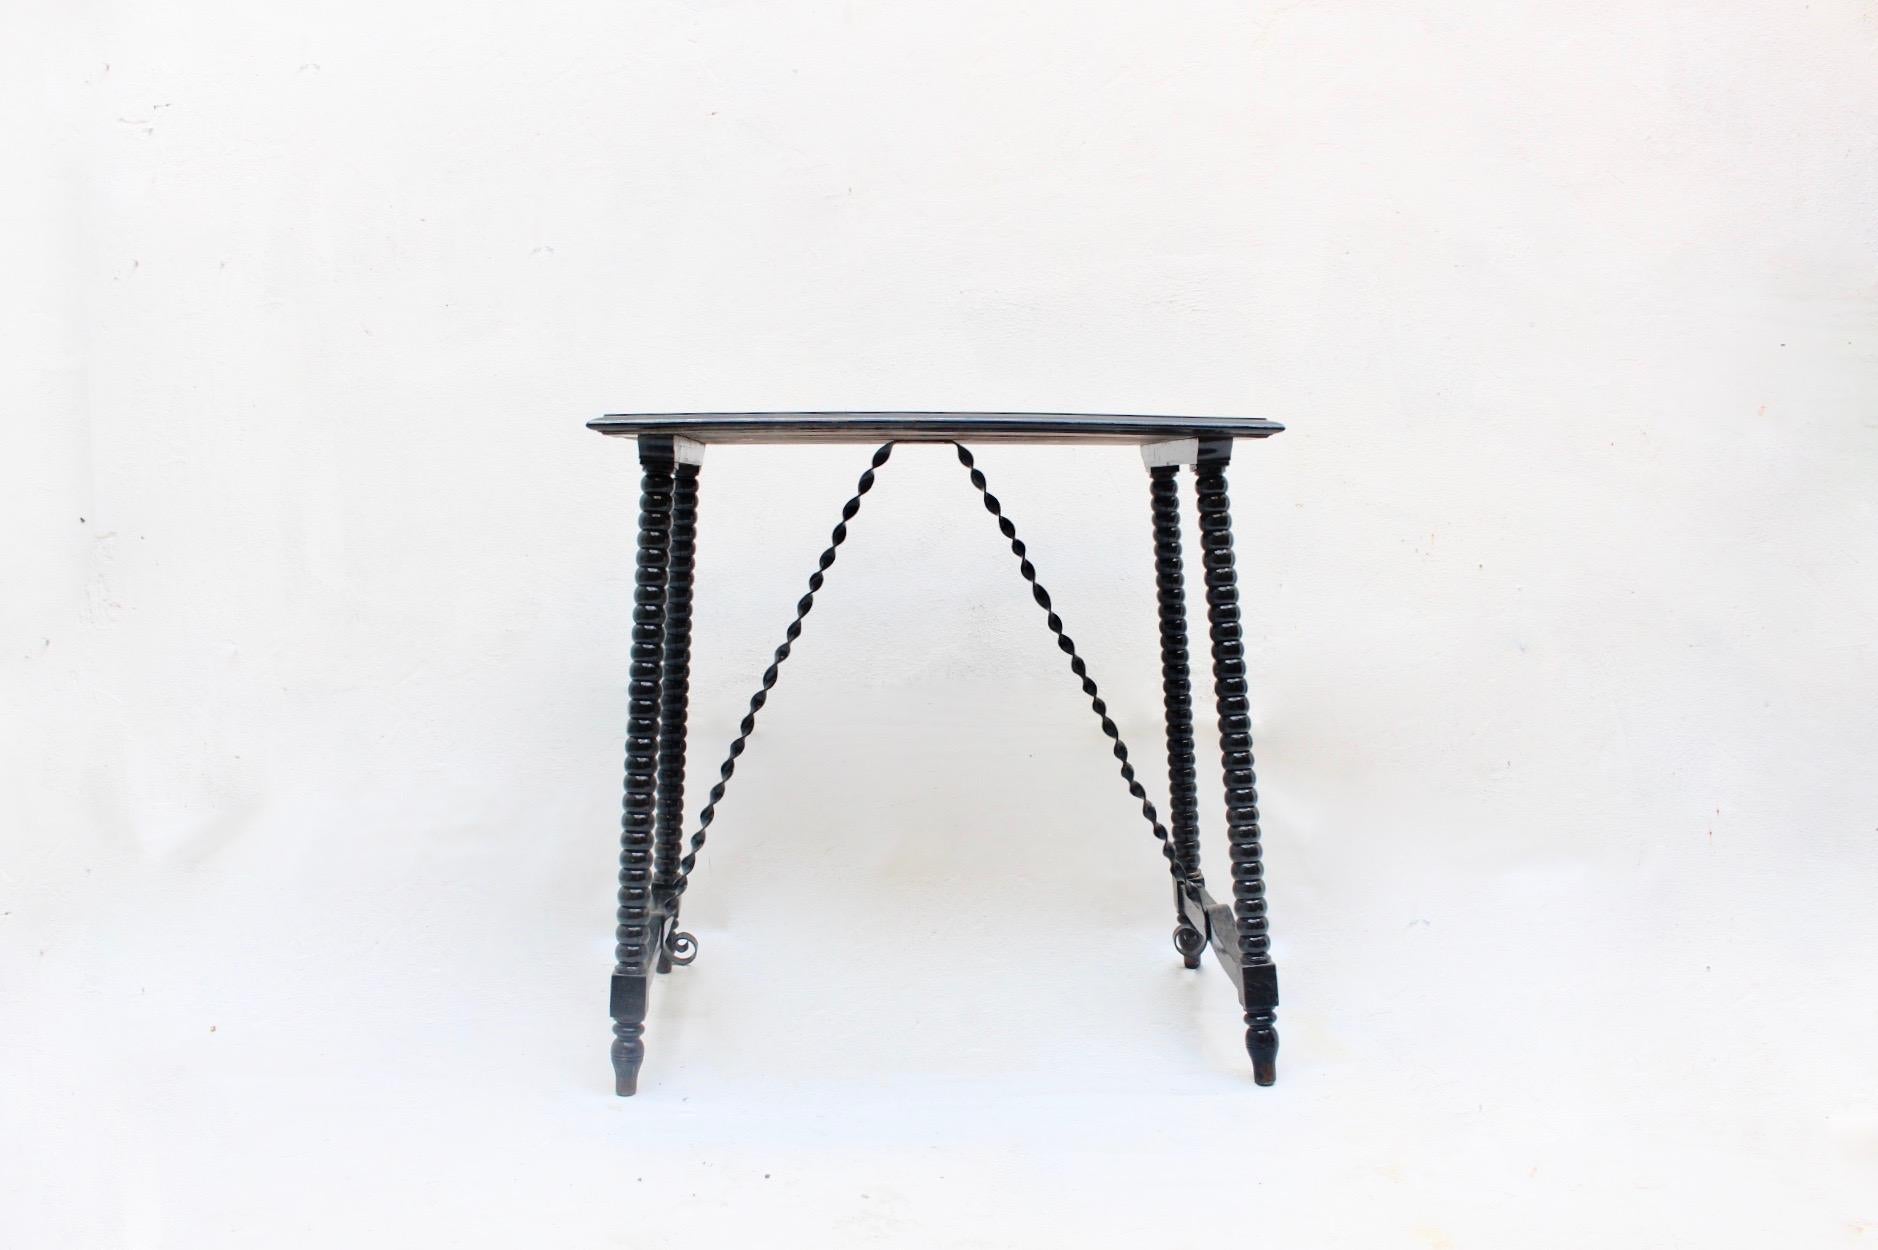 Baroque Revival Baroque Spanish Table with Turned Legs and Iron Stretches, 19th Century For Sale